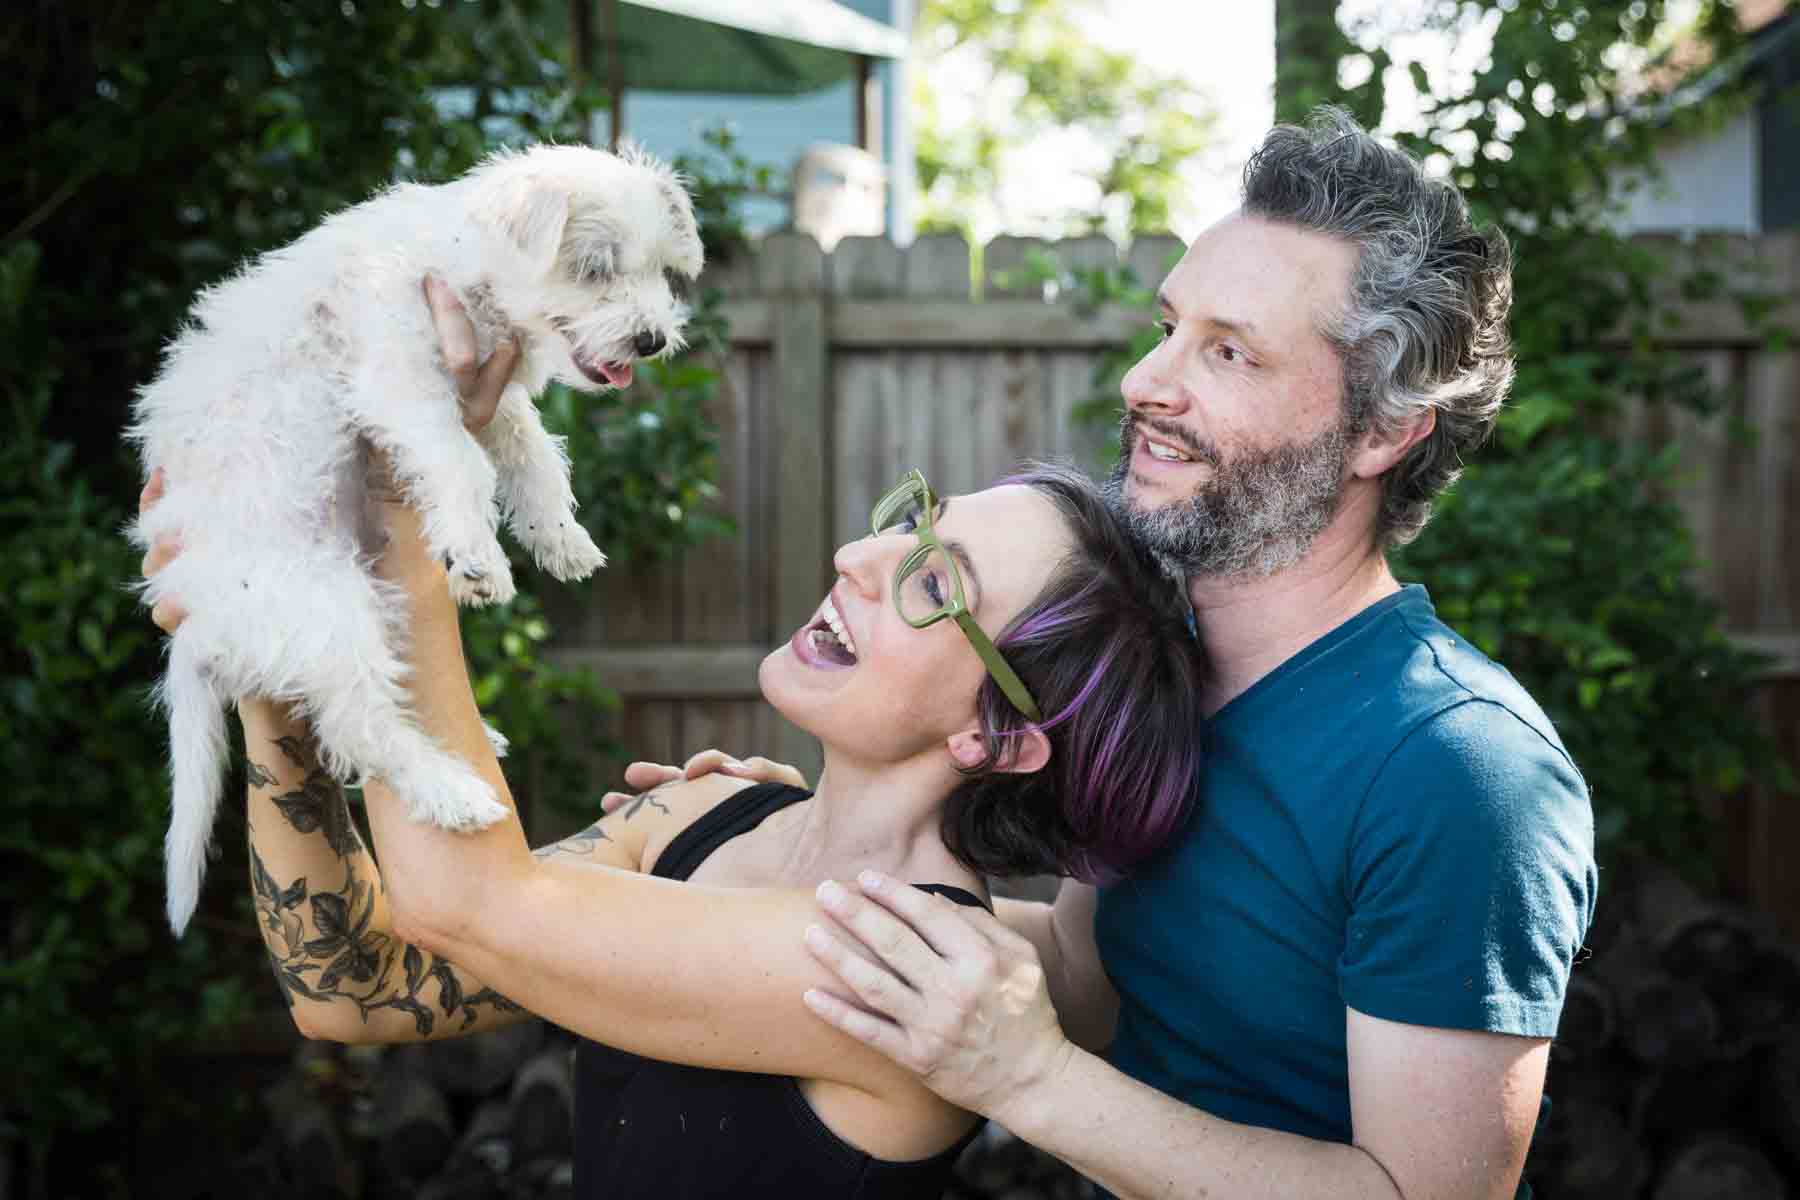 Woman holding up white puppy in front of man and wooden fence for an article on pet photo tips